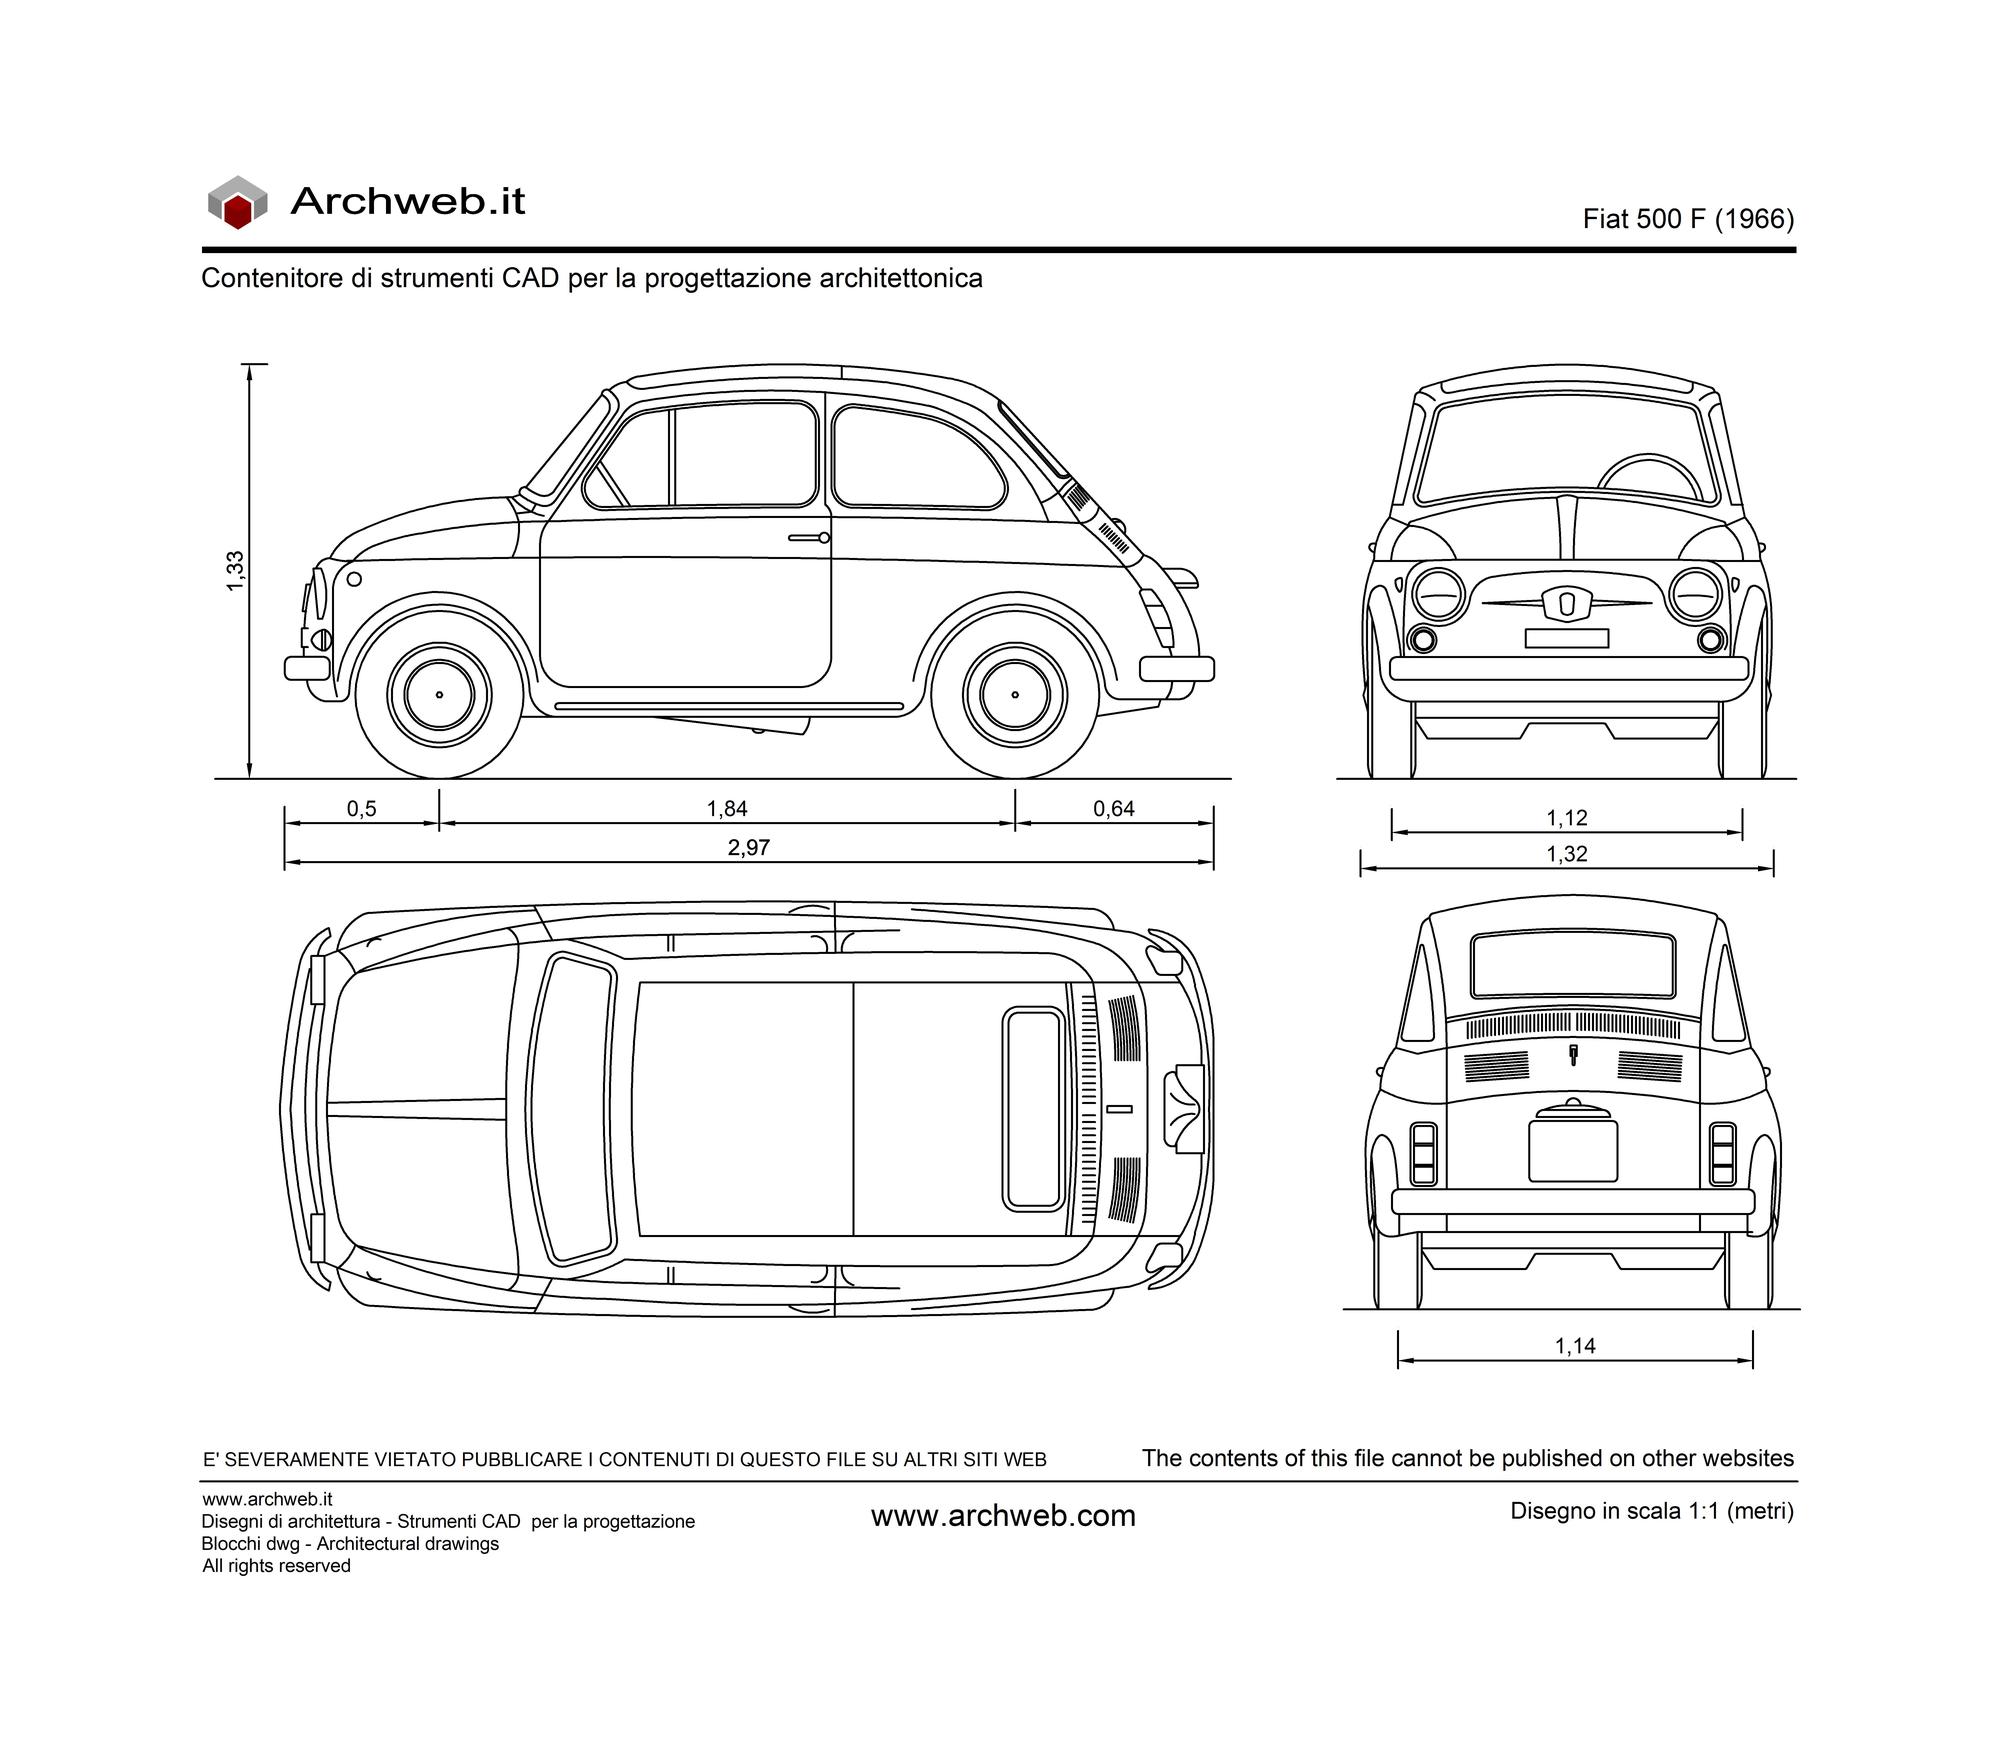 Fiat 500 F dwg drawings. 1:100 scale drawing.